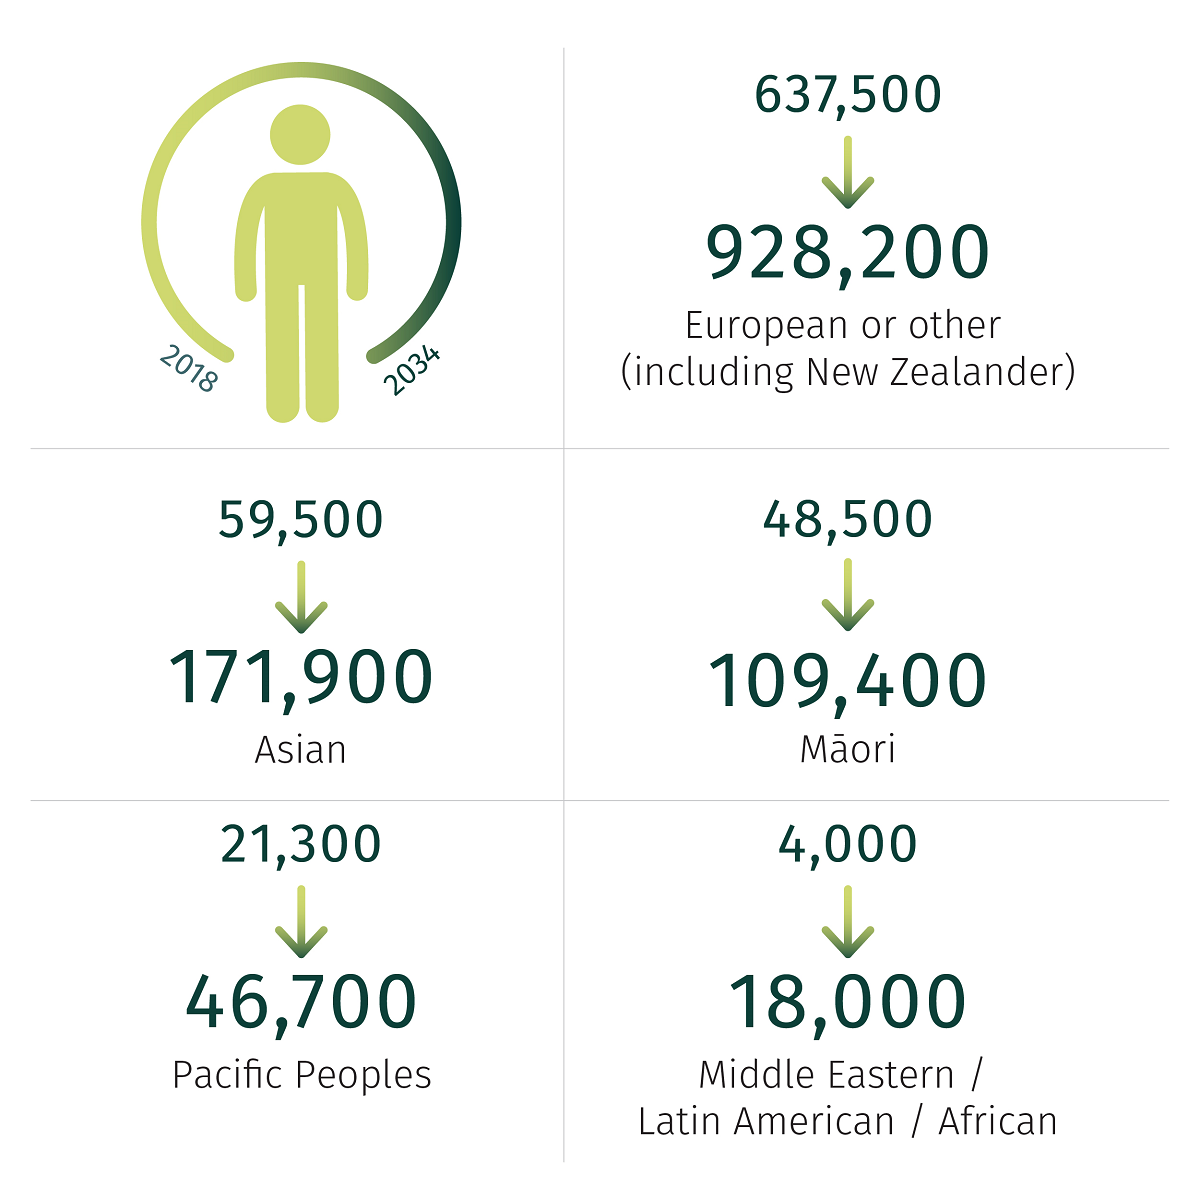 Our population is becoming more diverse. European or other (including New Zealander); 2018: 637,500, 2034: 928,200. Asian; 2018: 59,500, 2034: 171,900. Māori; 2018: 48,500, 2034: 109,400. Pacific Peoples; 2018: 21,300, 2034: 46,700. Middle Eastern, Latin American, African; 2018: 4,000, 2034: 18,000.